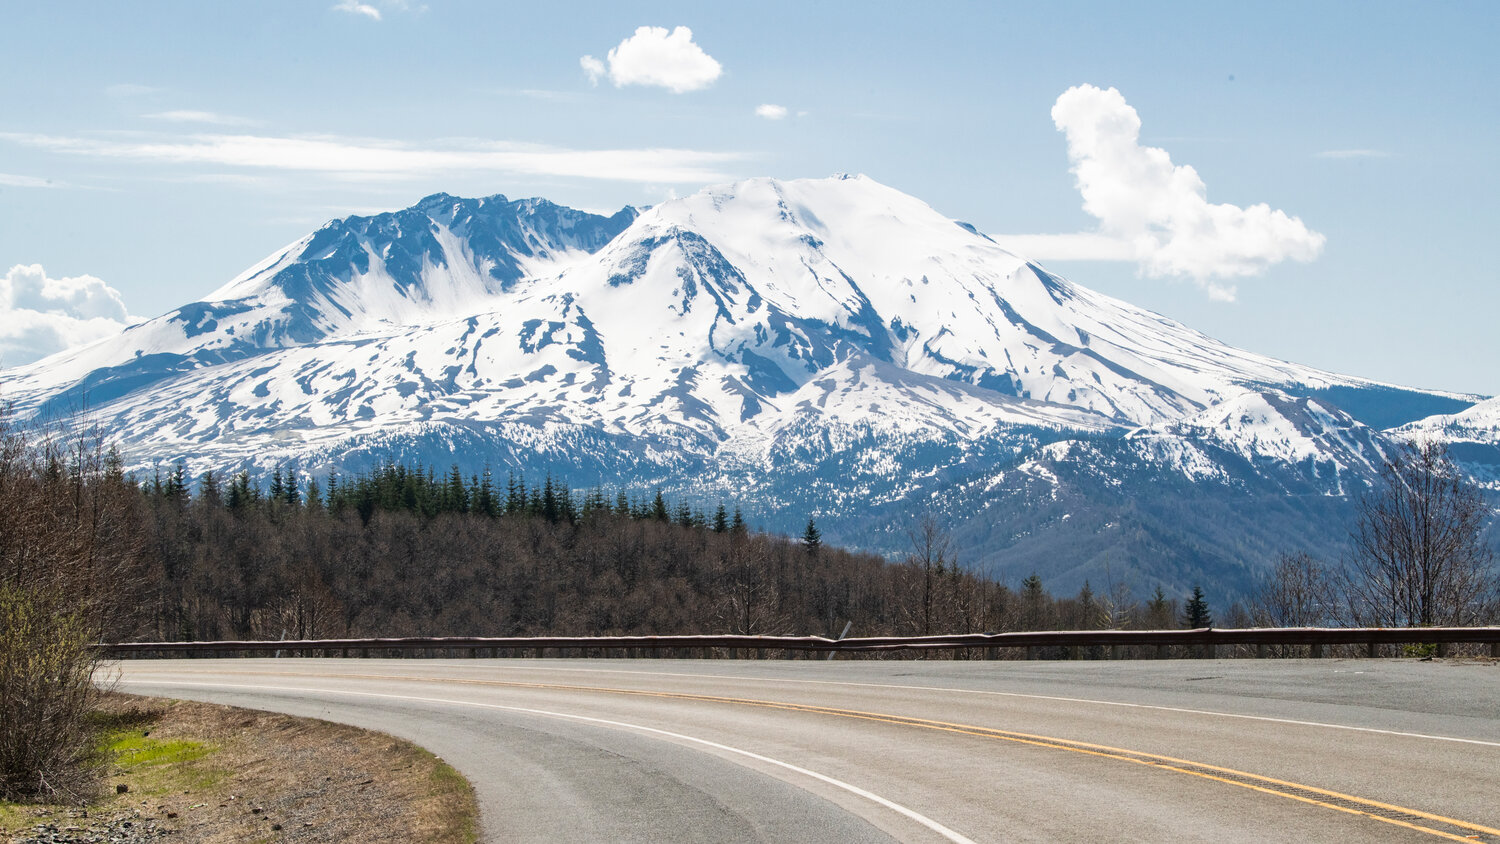 The road to Mount St. Helens is open and clear on Thursday, May 11.